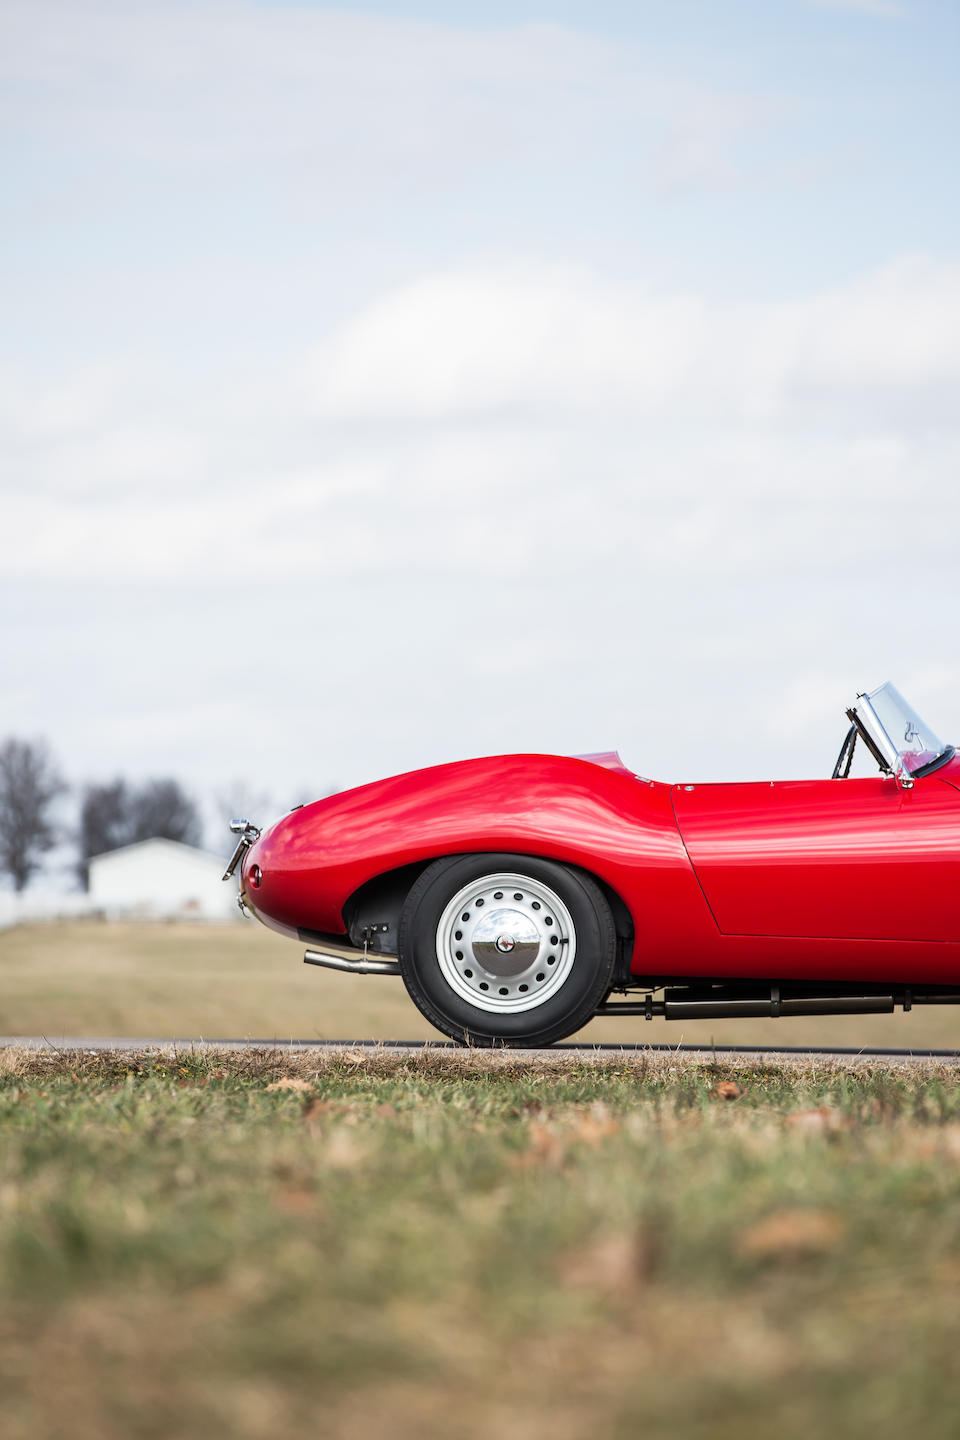 <b>1954 Arnolt Bristol Prototype Roadster</b><br />Chassis no. 404X3000<br />Engine no. 100D 754